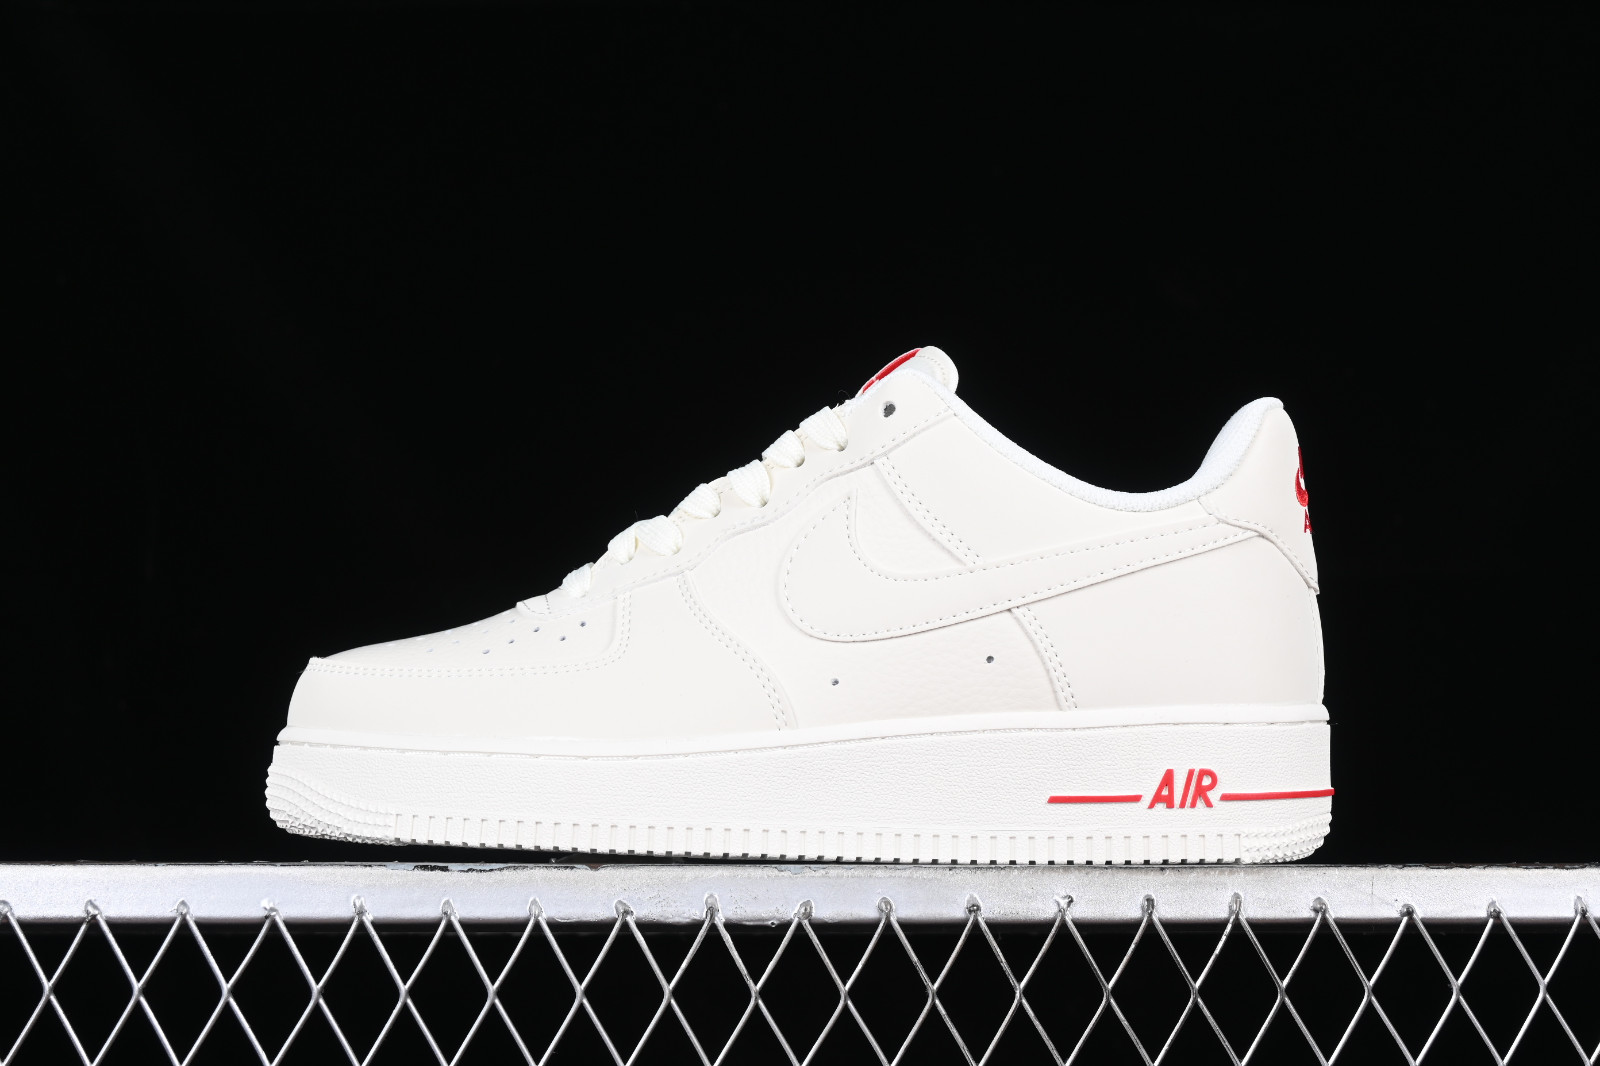 Nike Air Force 1 '07 LV8 sneakers in off-white